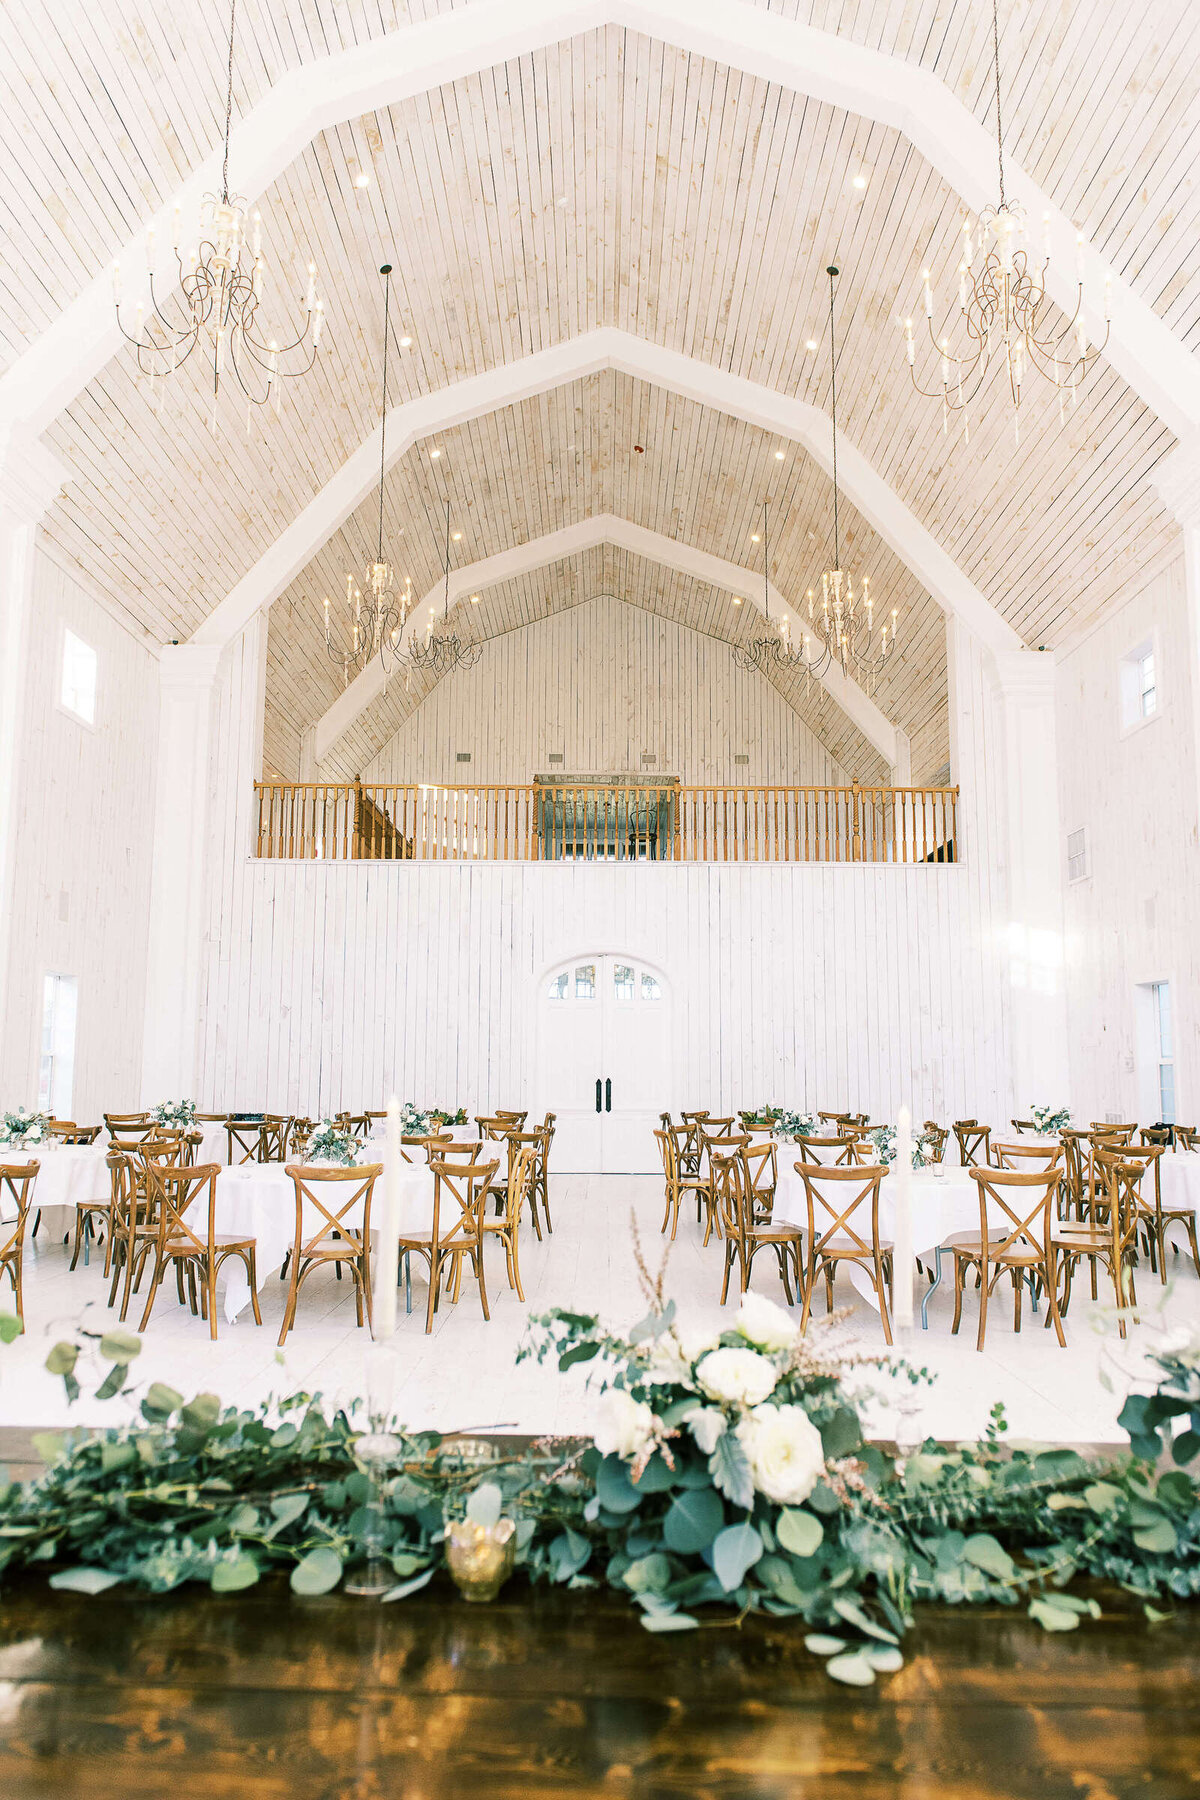 The White Sparrow wedding venue with reception set up and greenery